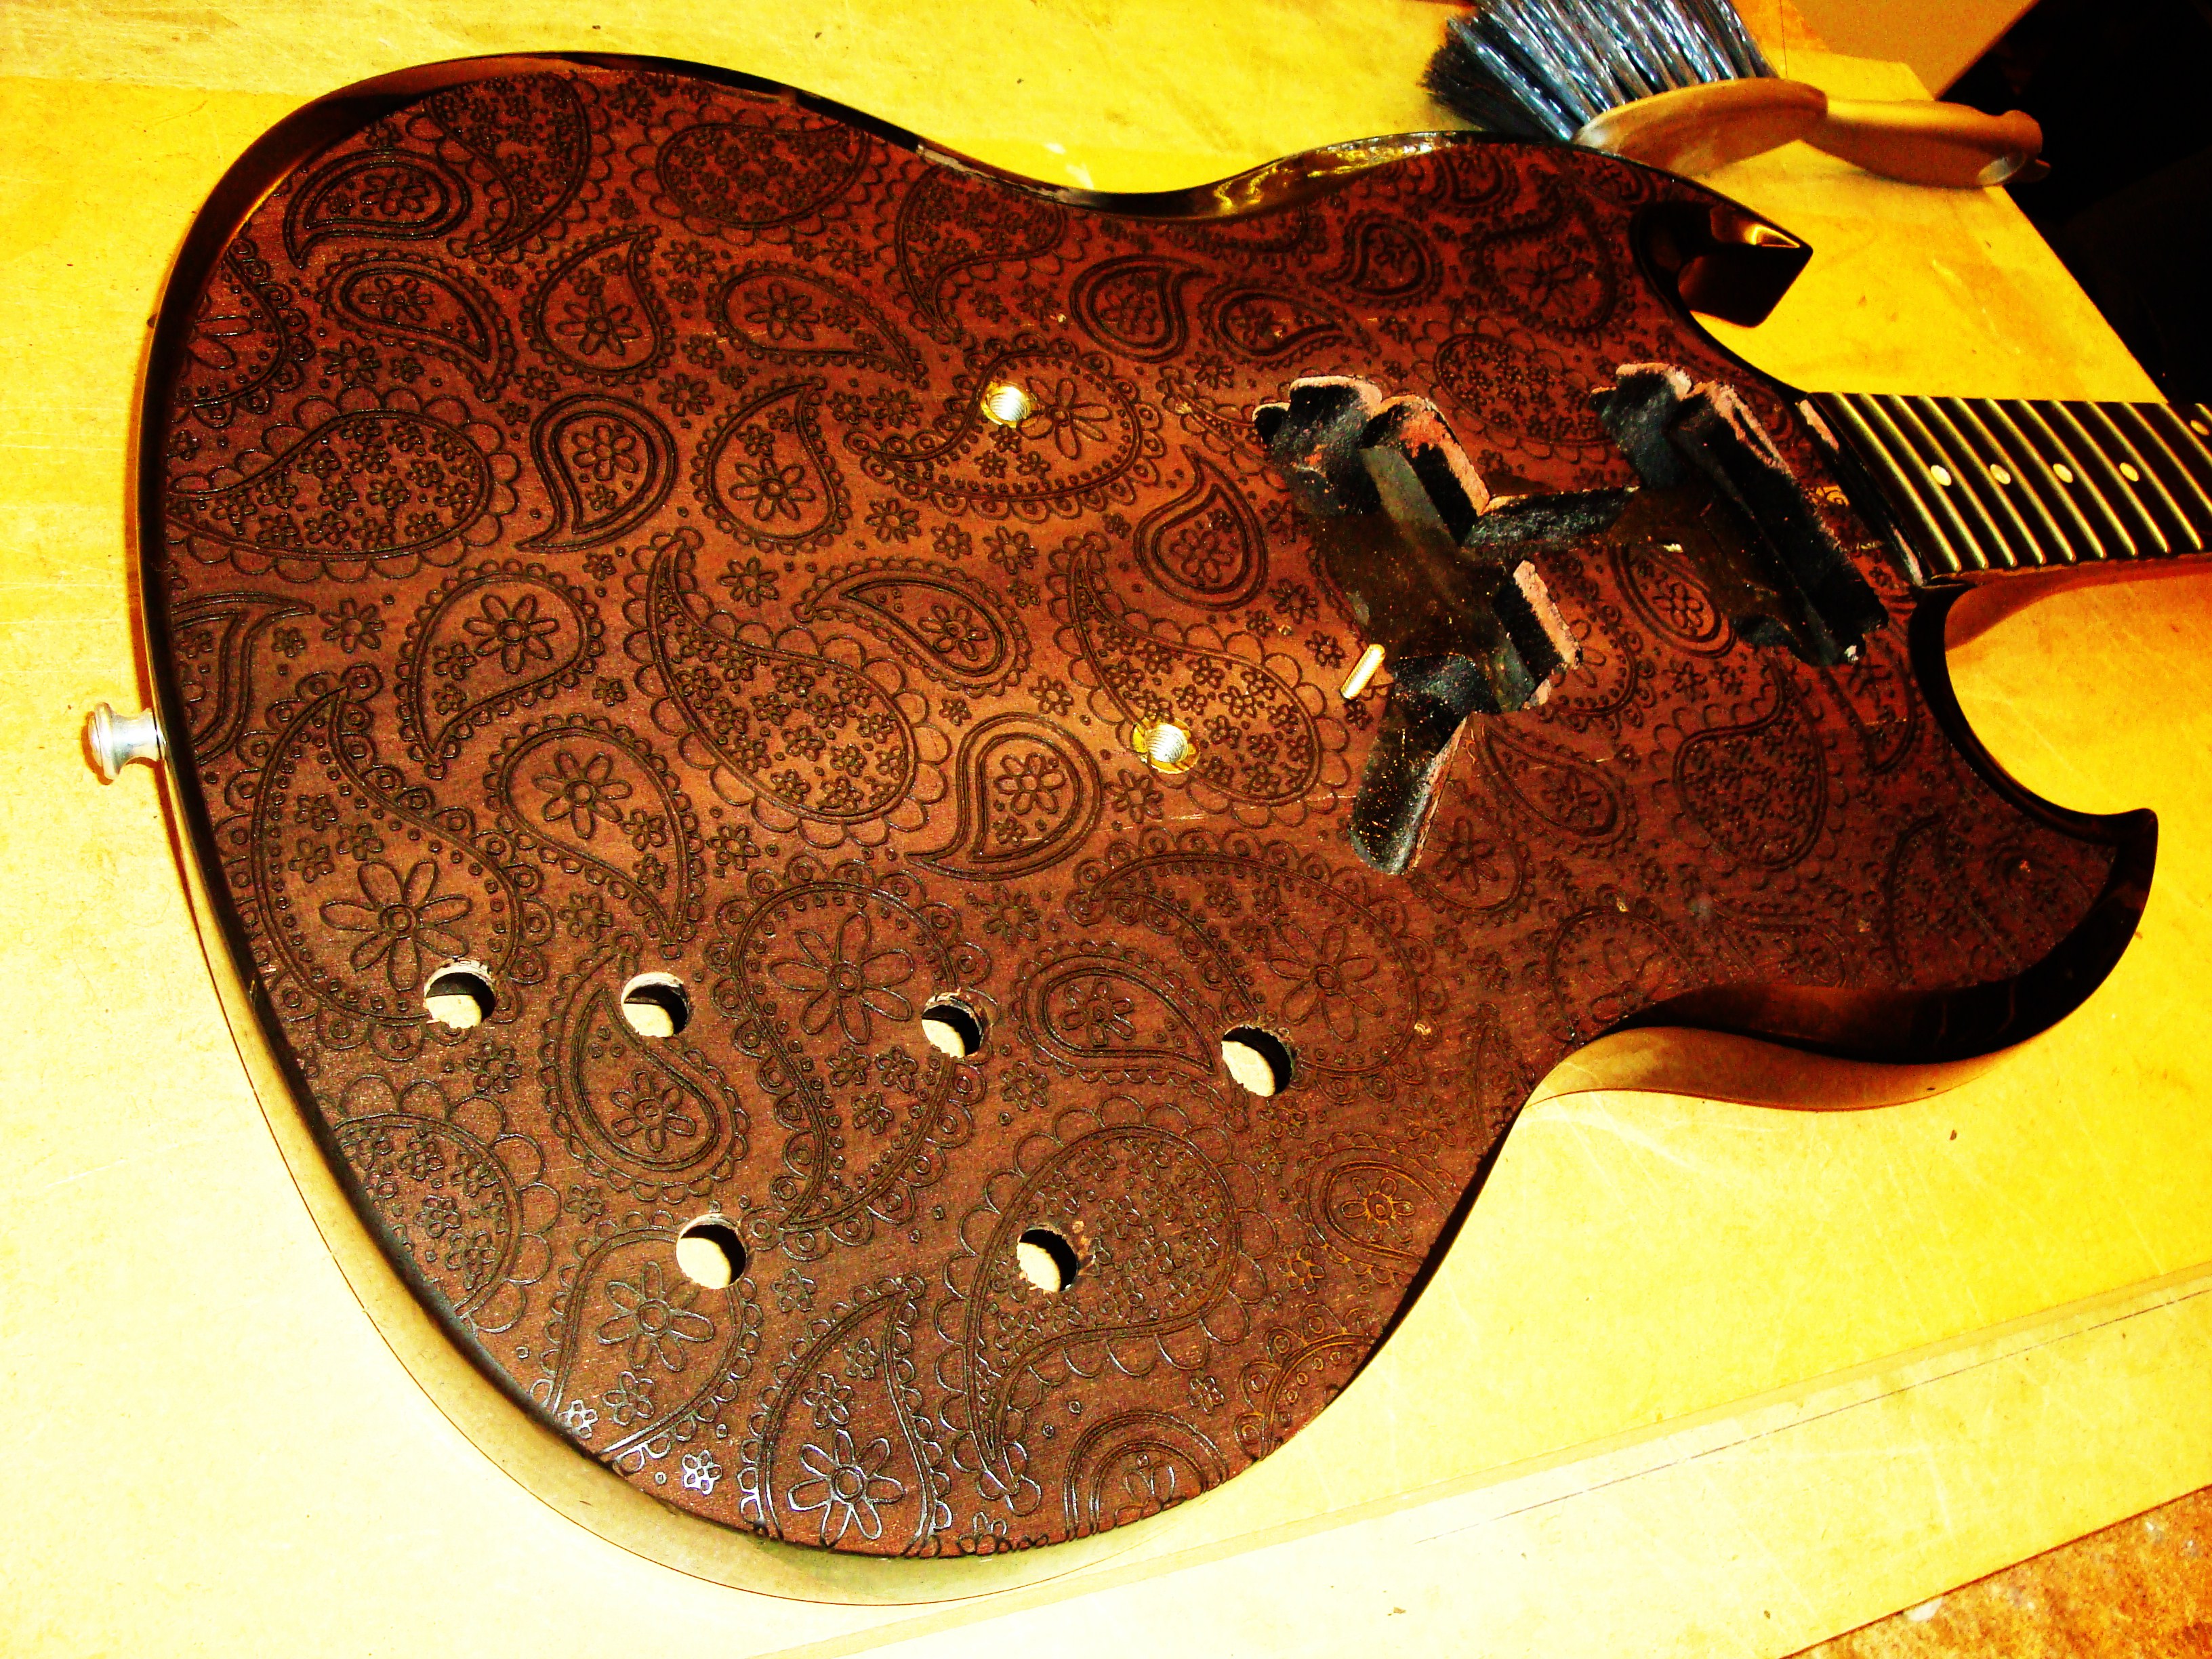 Engraved SG guitar with Paisley pattern April 2010